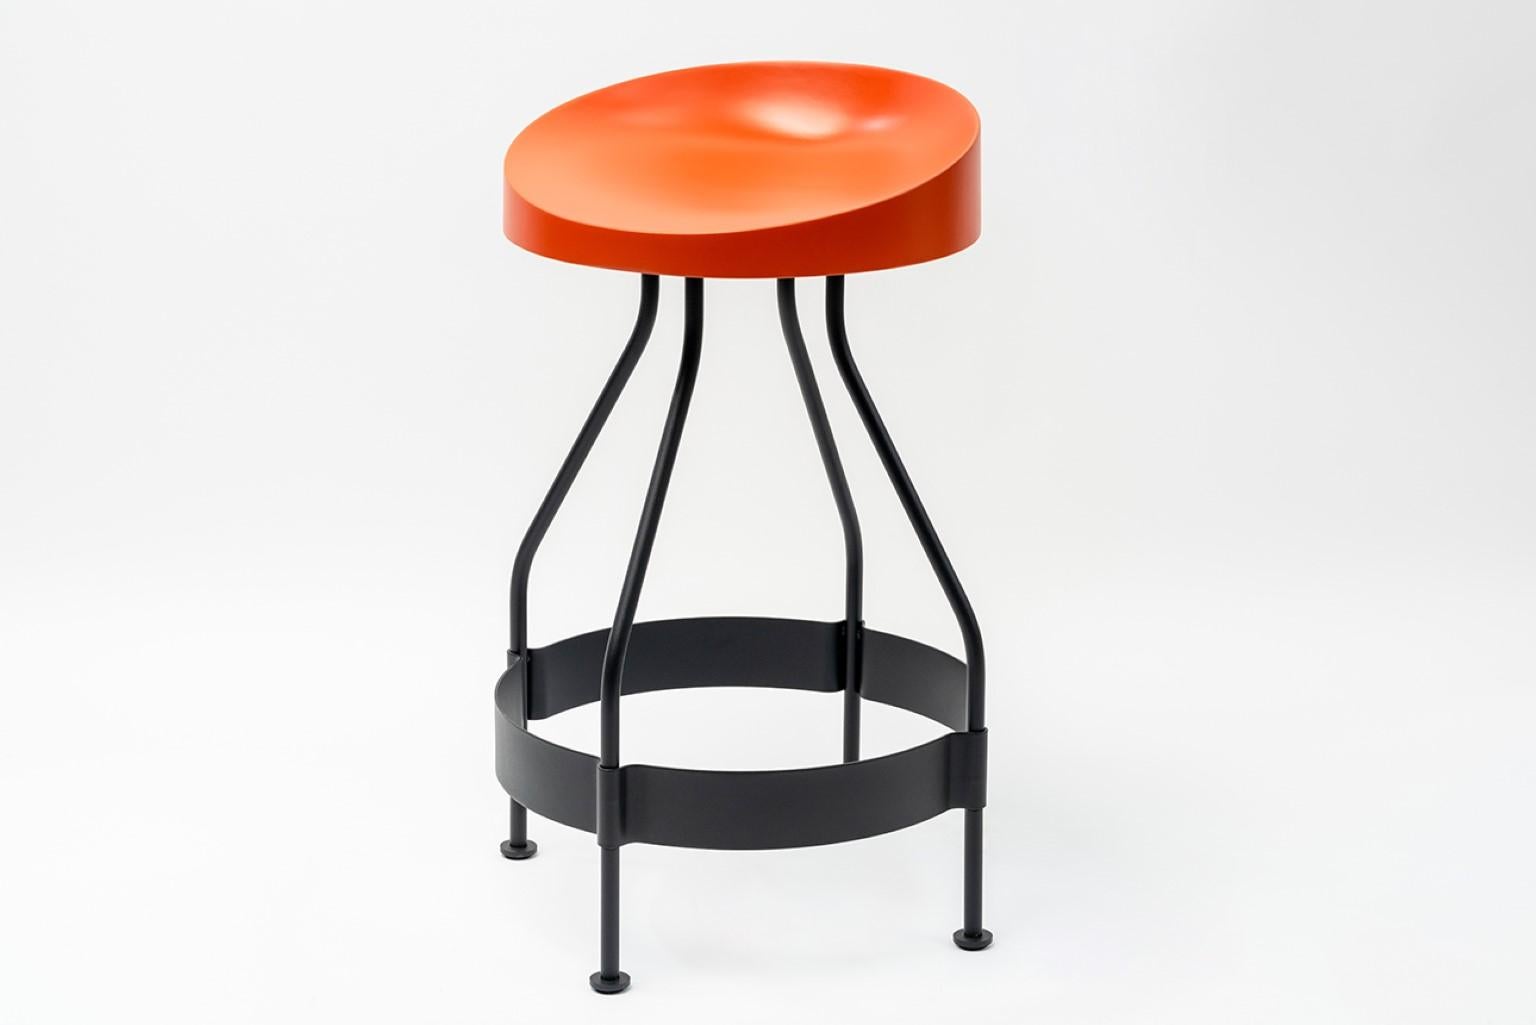 Olindias outdoor Tabouret by Luca Nichetto 
Dimensions: W 48 x D 48 x H 83 cm
Materials: Black powder coat metal structure, Seat in black/coral/duck blue/warm grey lacquered poliurethane

Olindias is a bar stool that can easily be adapted to all